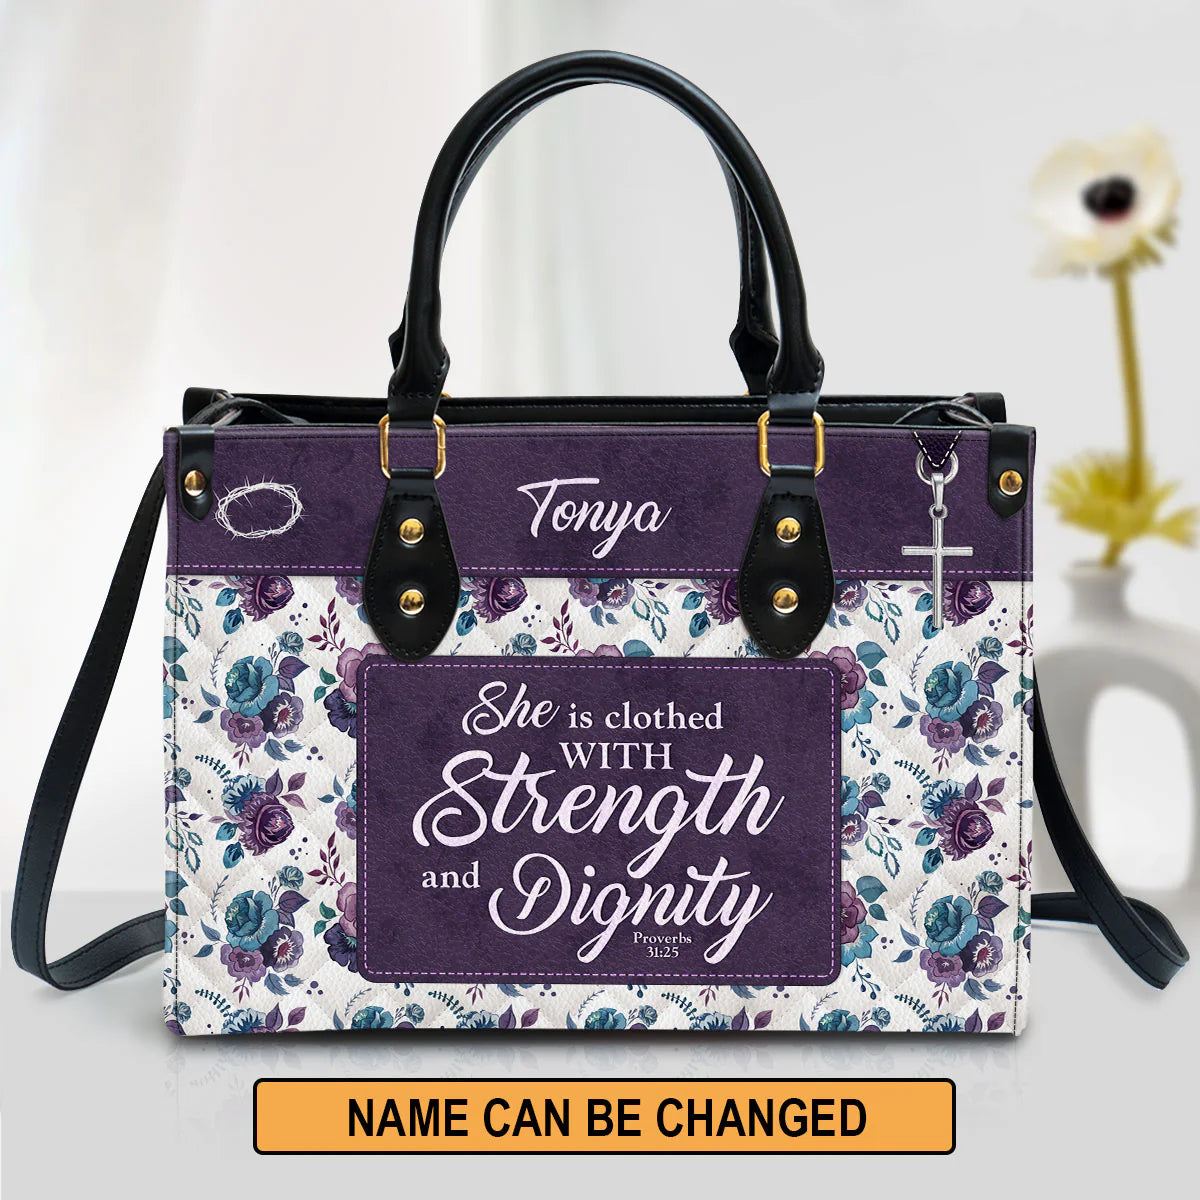 Christianart Handbag, She Is Clothed With Strength and Dignity, Personalized Gifts, Gifts for Women. - Christian Art Bag